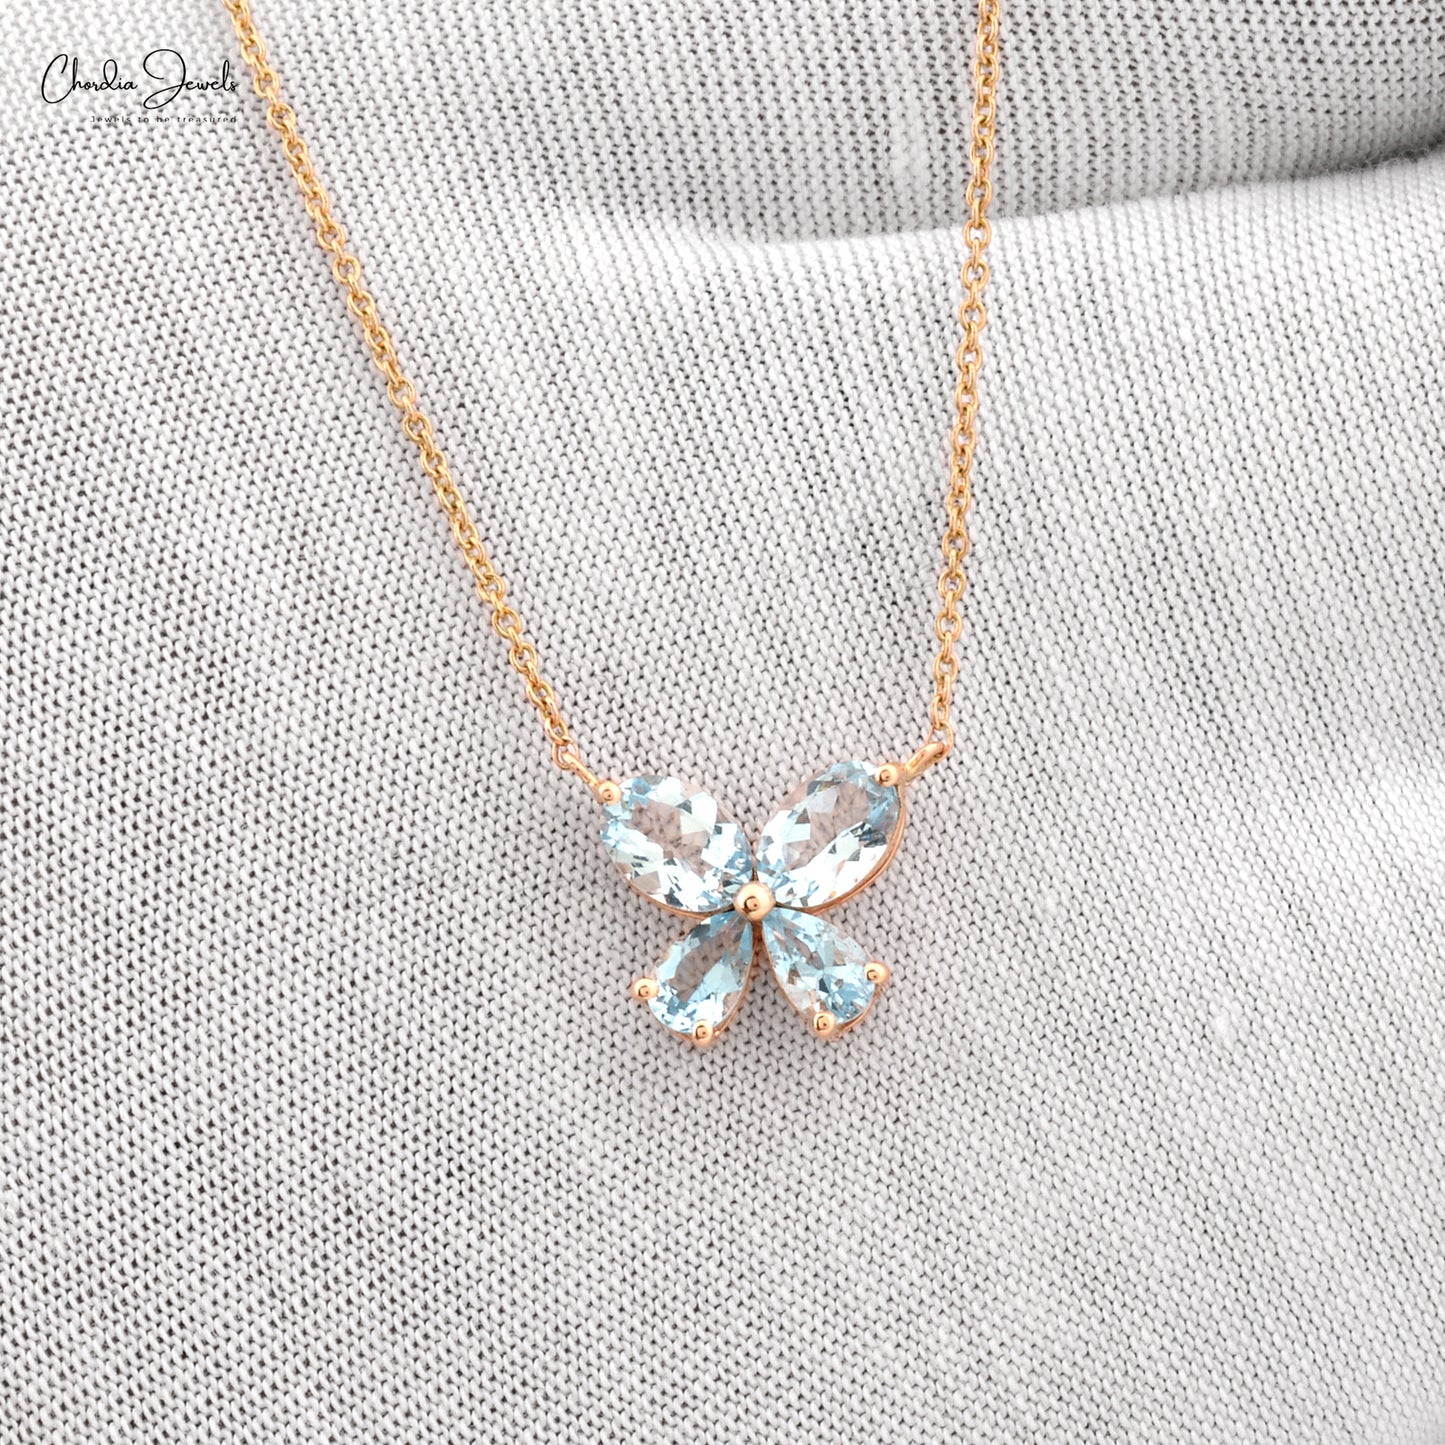 Good Quality Luxury Sky Blue Stone Butterfly Necklace March Birthstone Natural Aquamarine Necklace in 14k Rose Gold Gift For Women